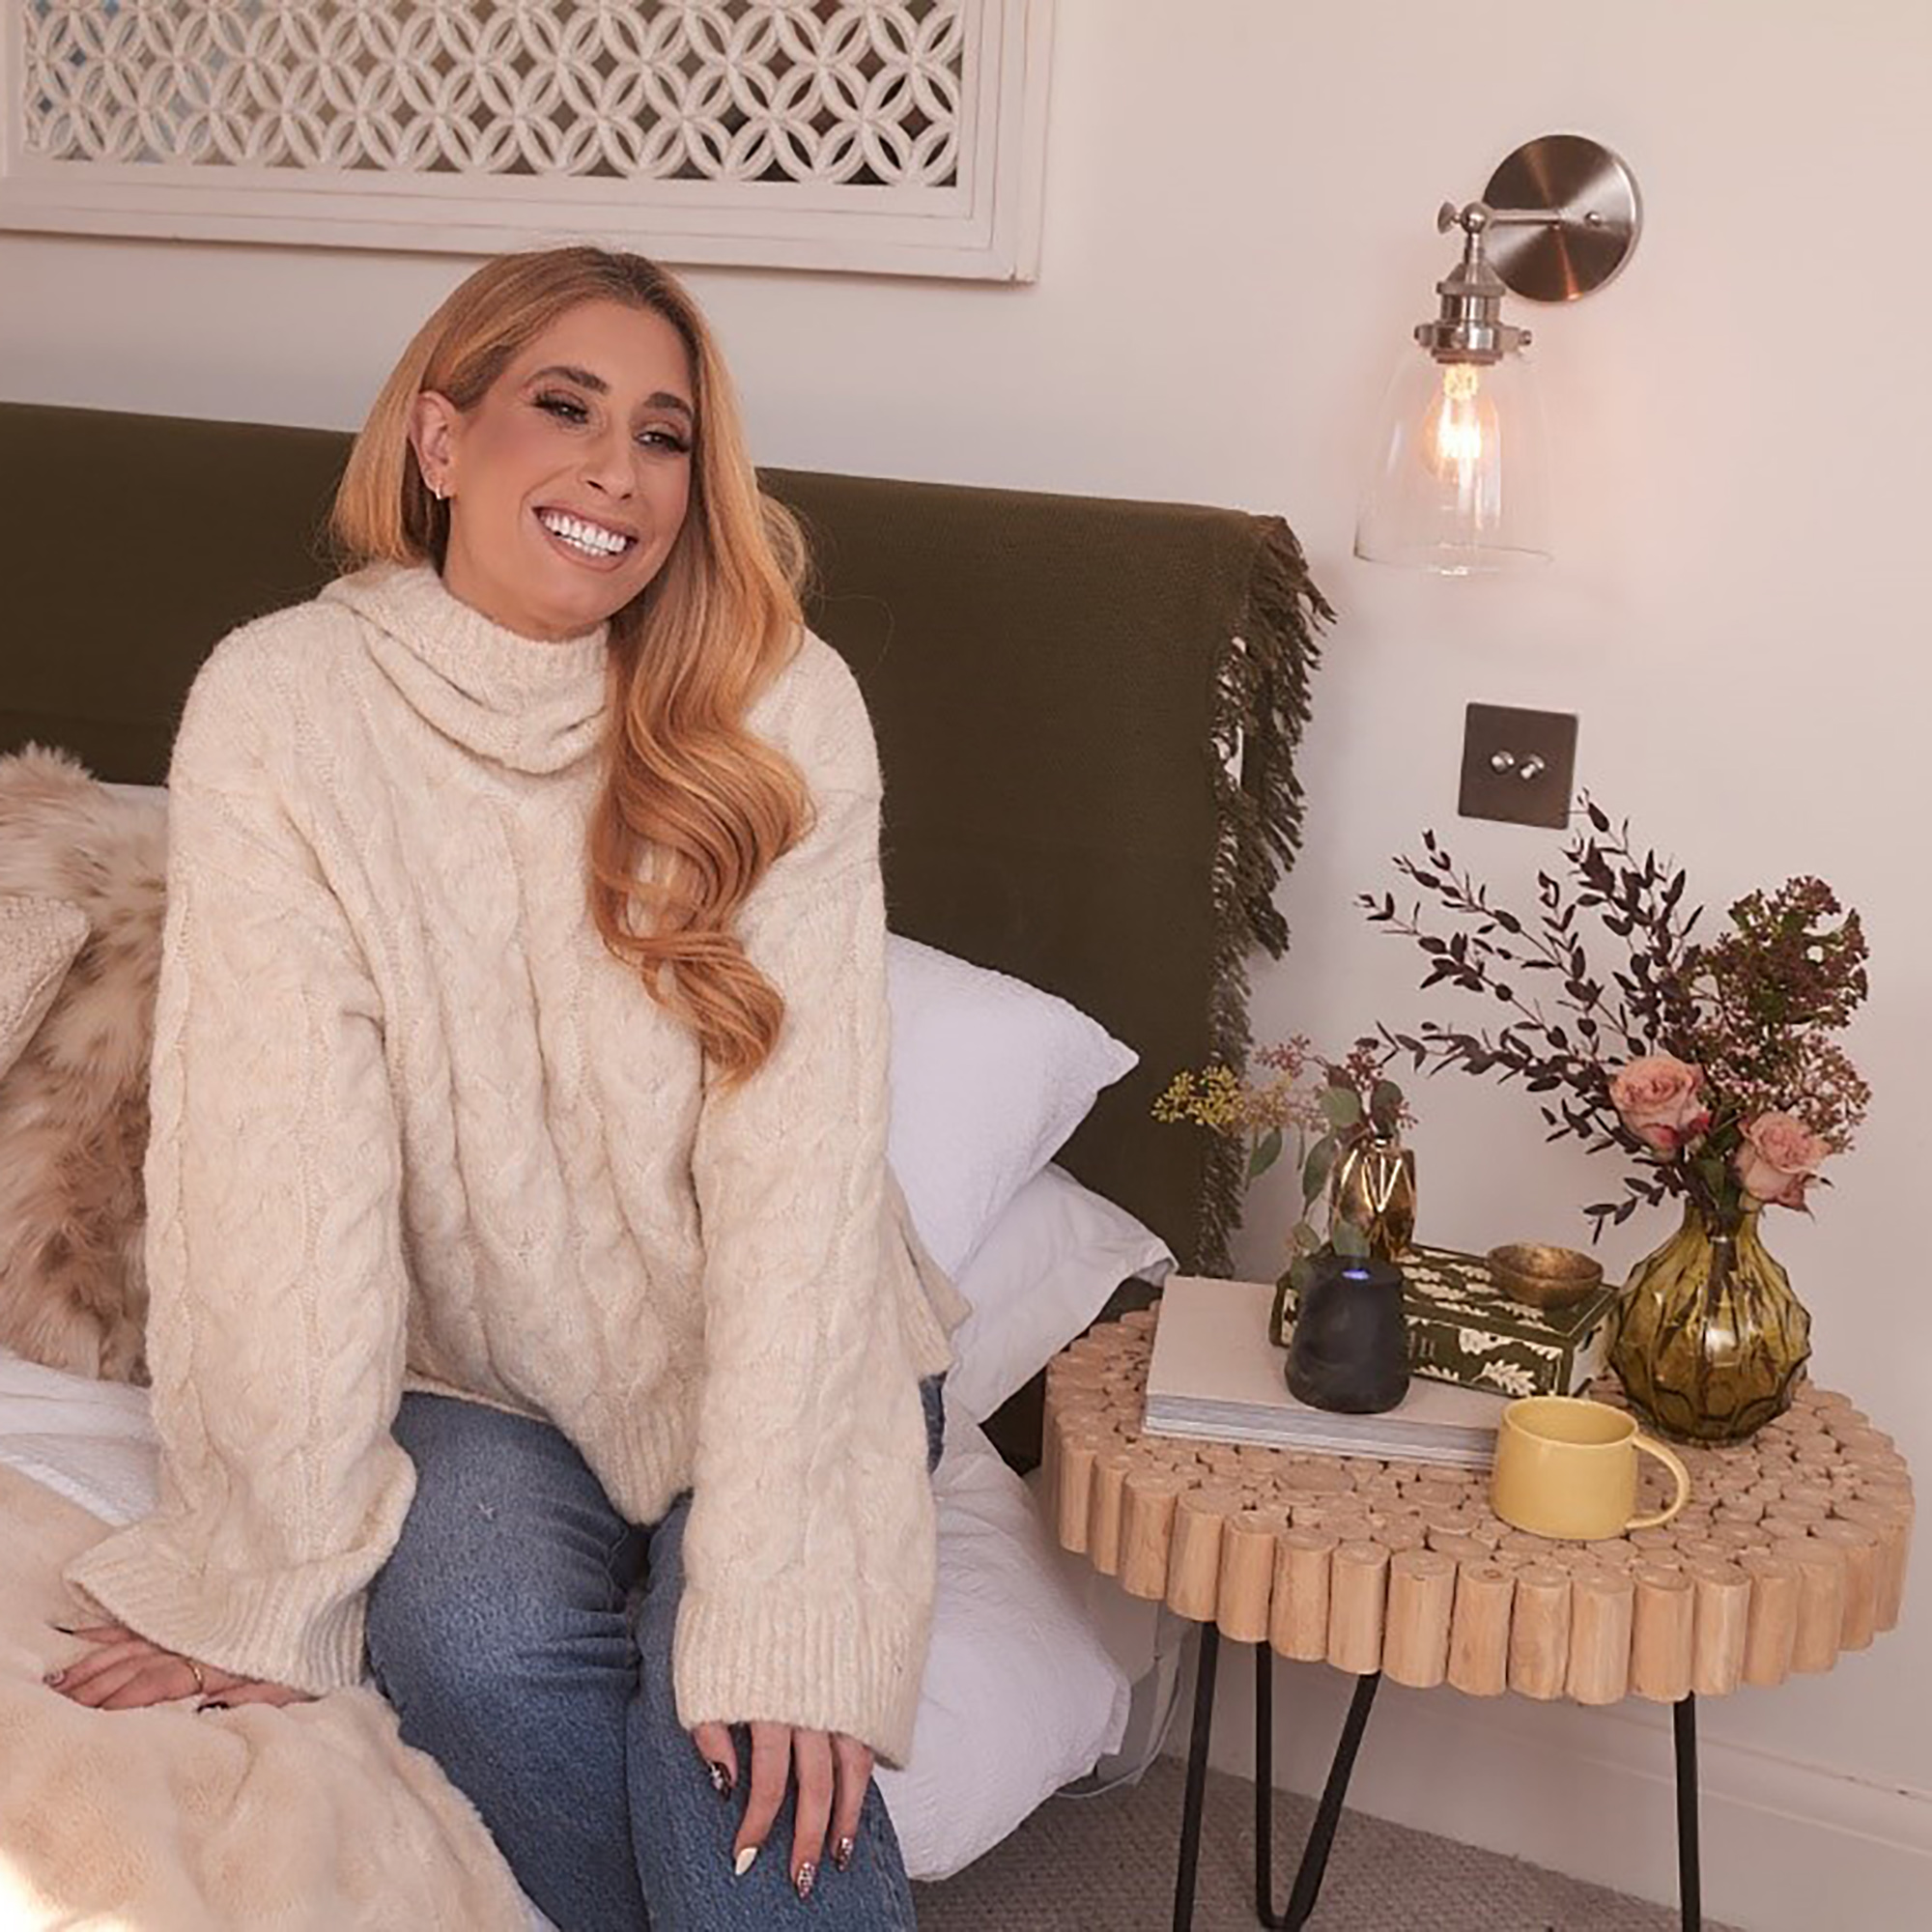 Stacey Solomon's new home fragrance collection will help you transition into cosy season